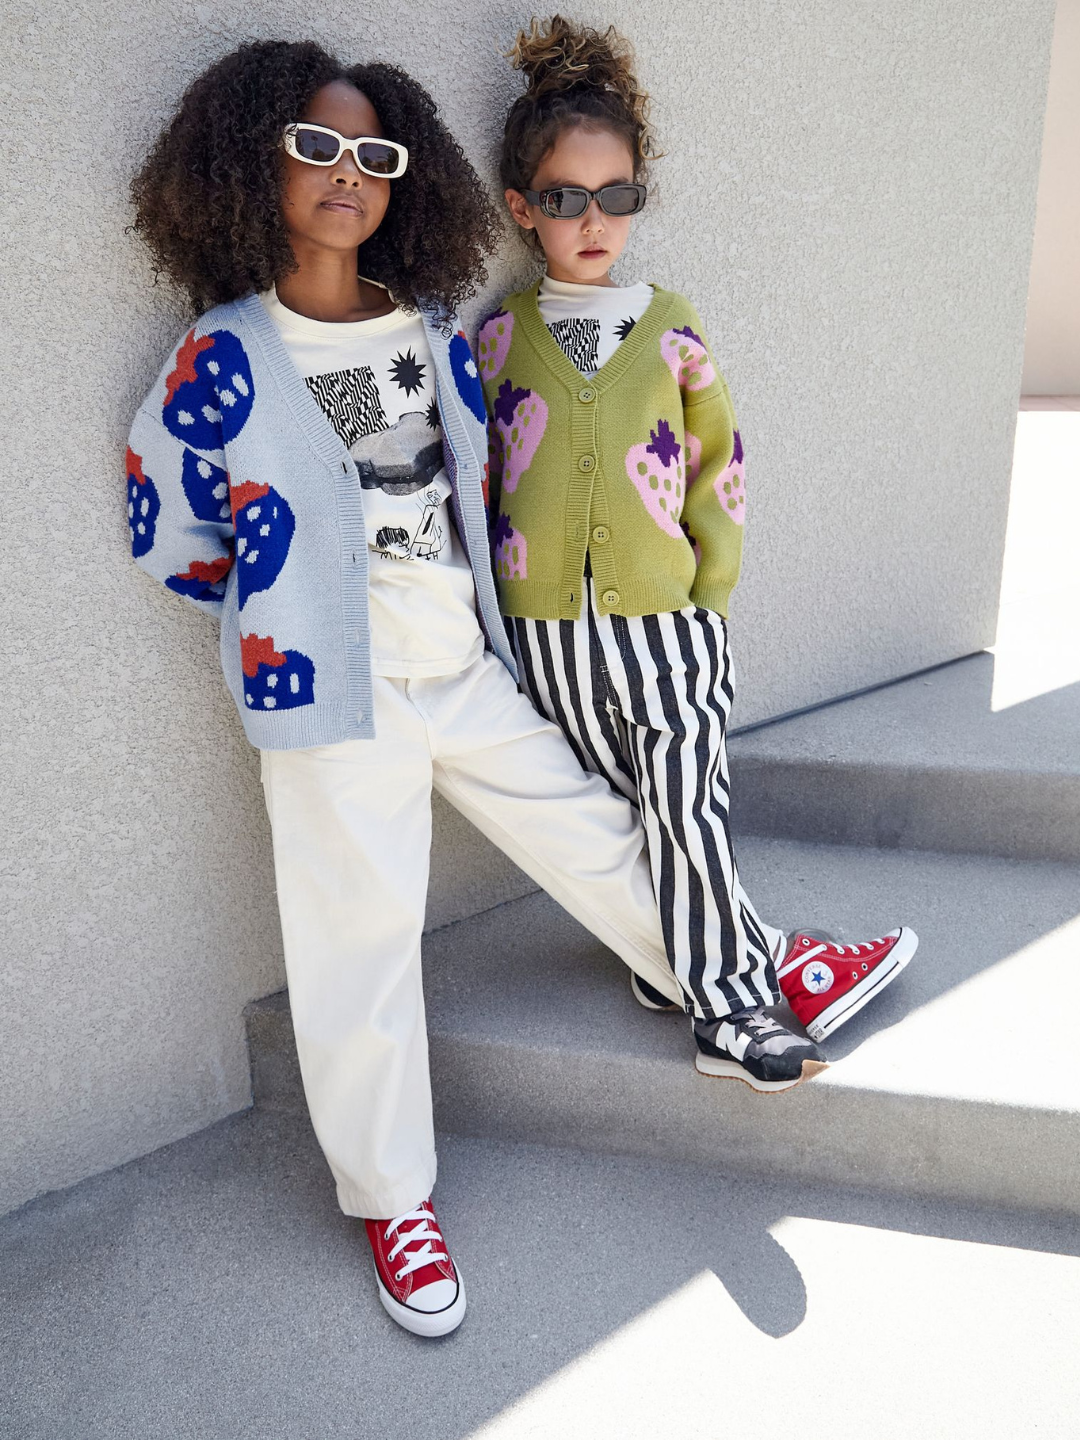 Two kids standing against a grey wall. One girl wears a blue cardigan patterned with darker blue strawberries, worn with a white graphic tee and white jeans, white rectangular sunglasses, and red hi-top sneakers. The other girl wears the same cardigan style, but in green with pink strawberries. She wears it with black rectangular sunglasses, a white graphic tee, black and white striped jeans, and grey sneakers.